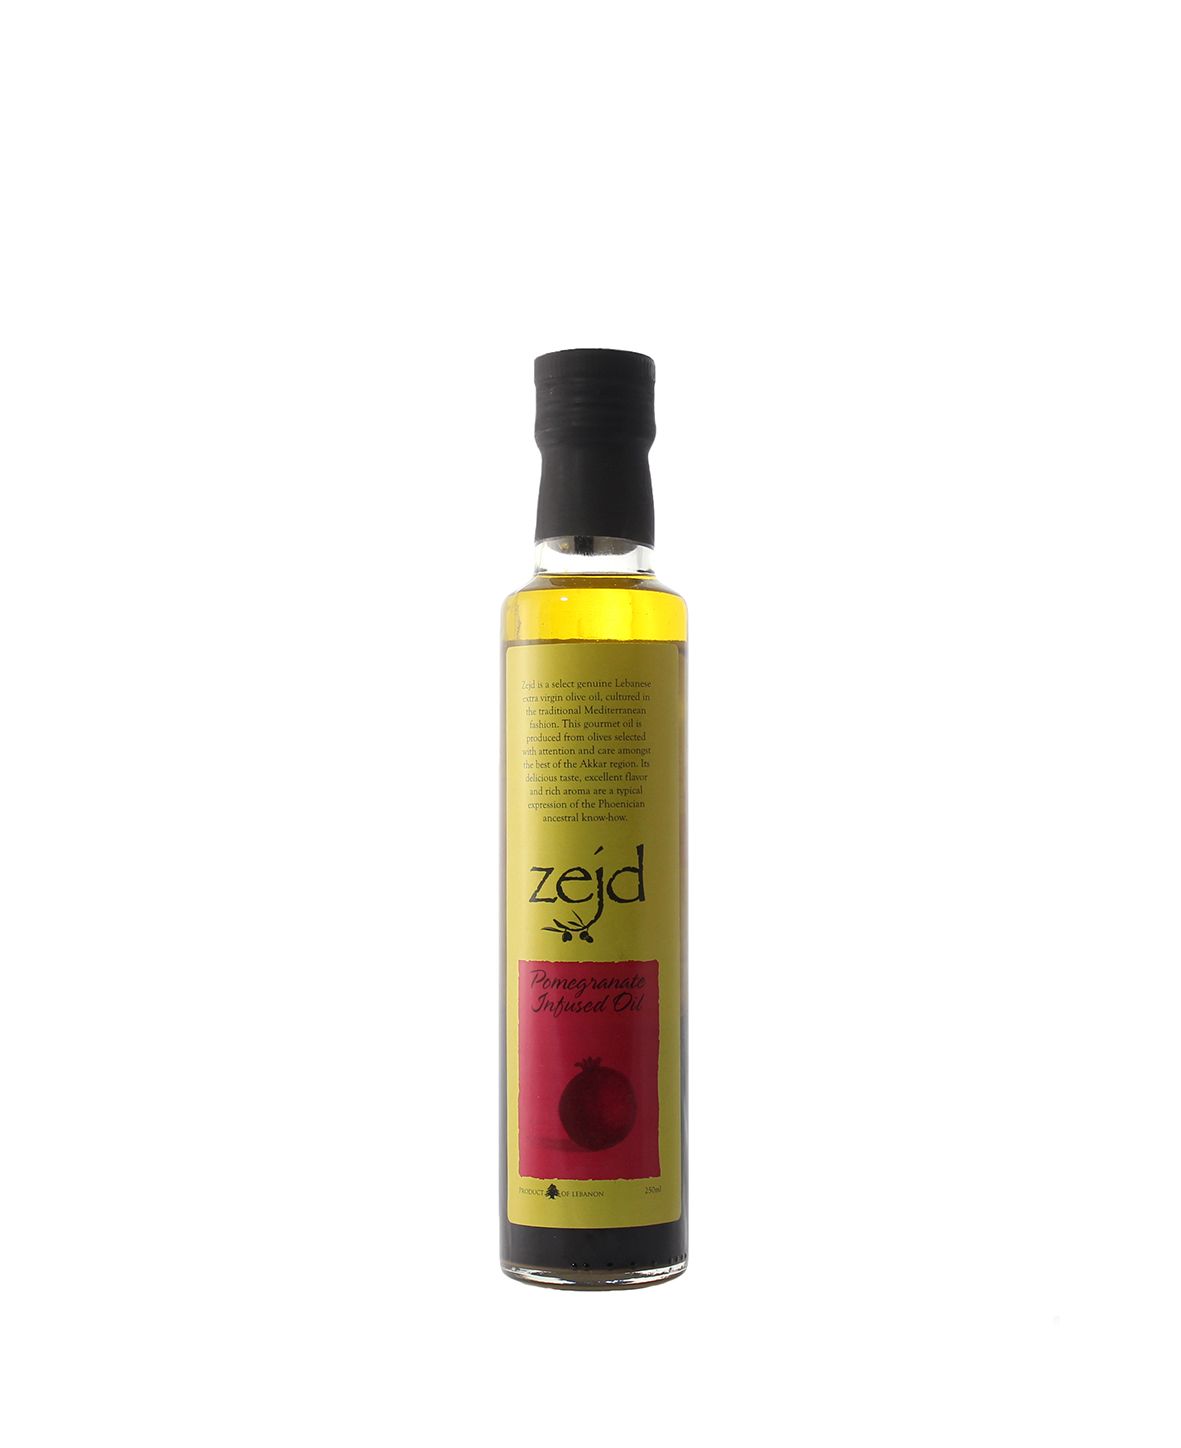 House of Zejd, Pomegranate Infused Oil, 250mL